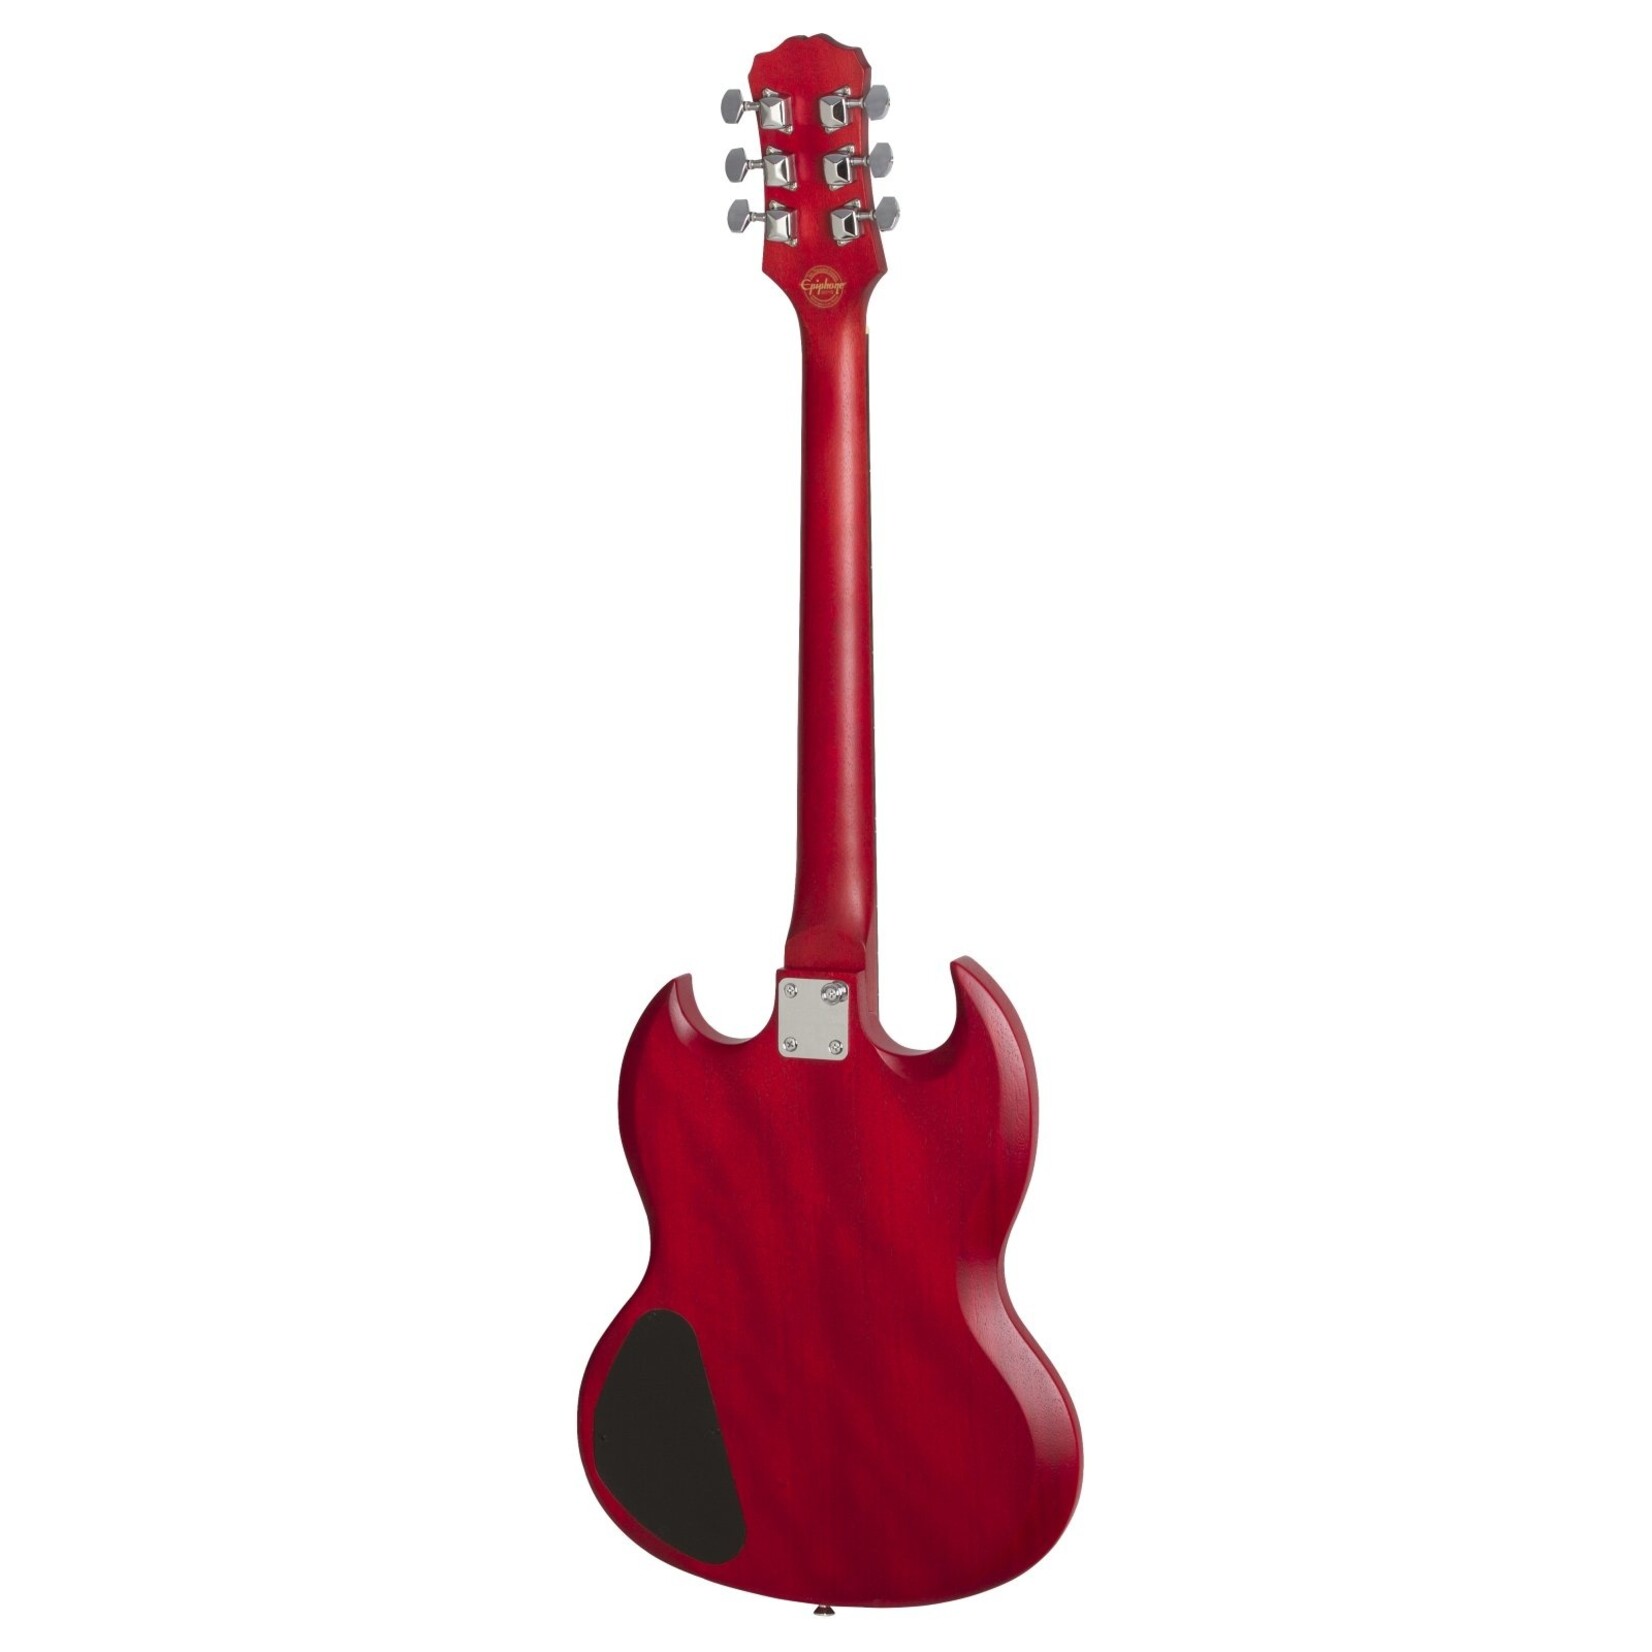 Epiphone SG Special Vintage Cherry Satin E1 Package W/ Amp, Cable, Tuner, Strap, Gig Bag & Picks